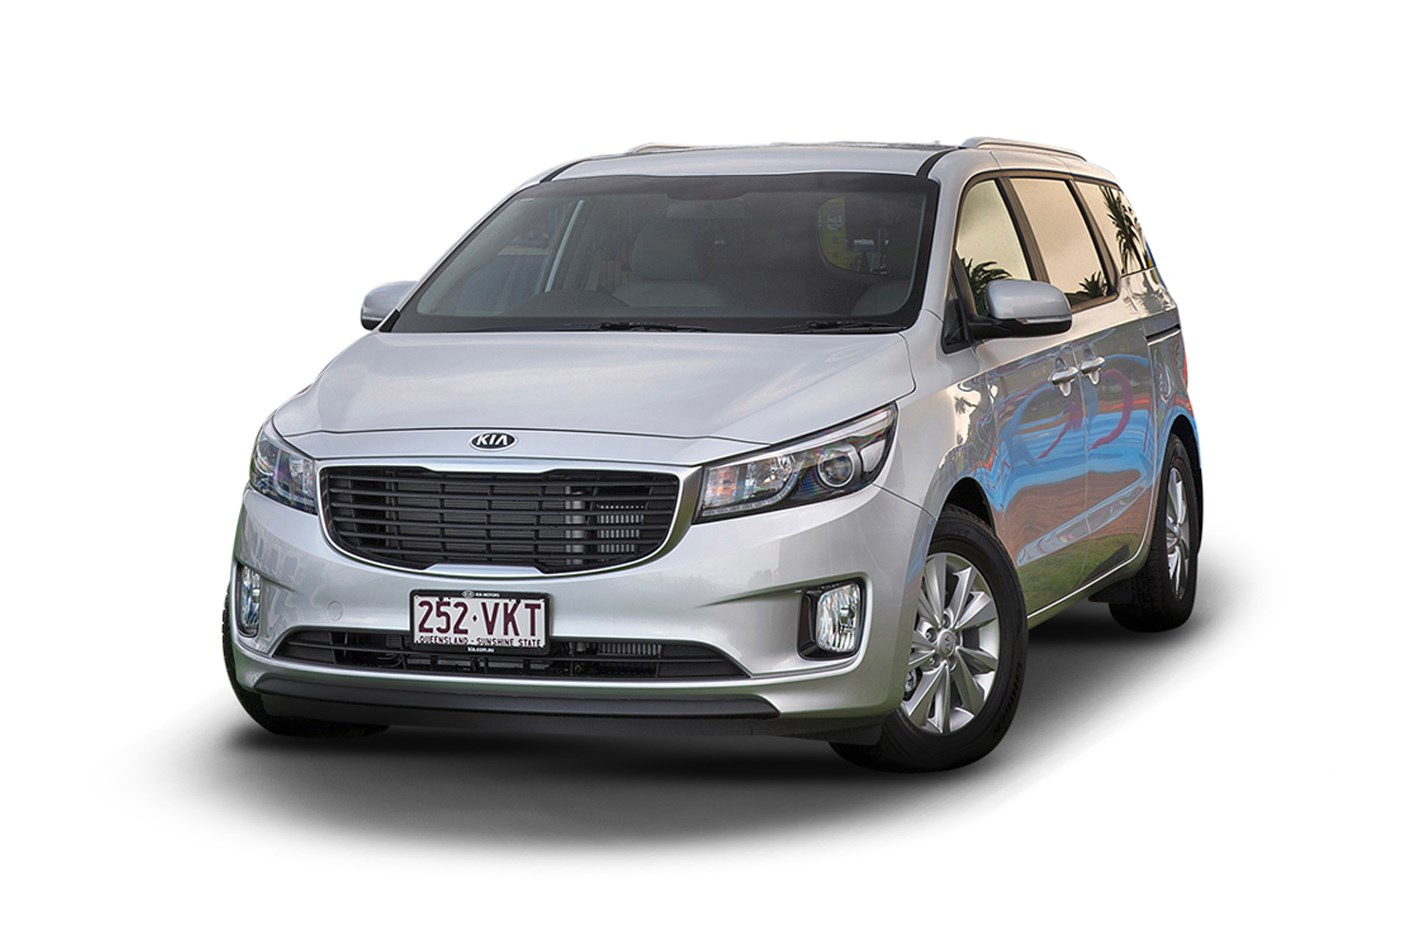 2015 KIA Carnival S, 3.3L 6cyl Petrol Automatic, People Mover